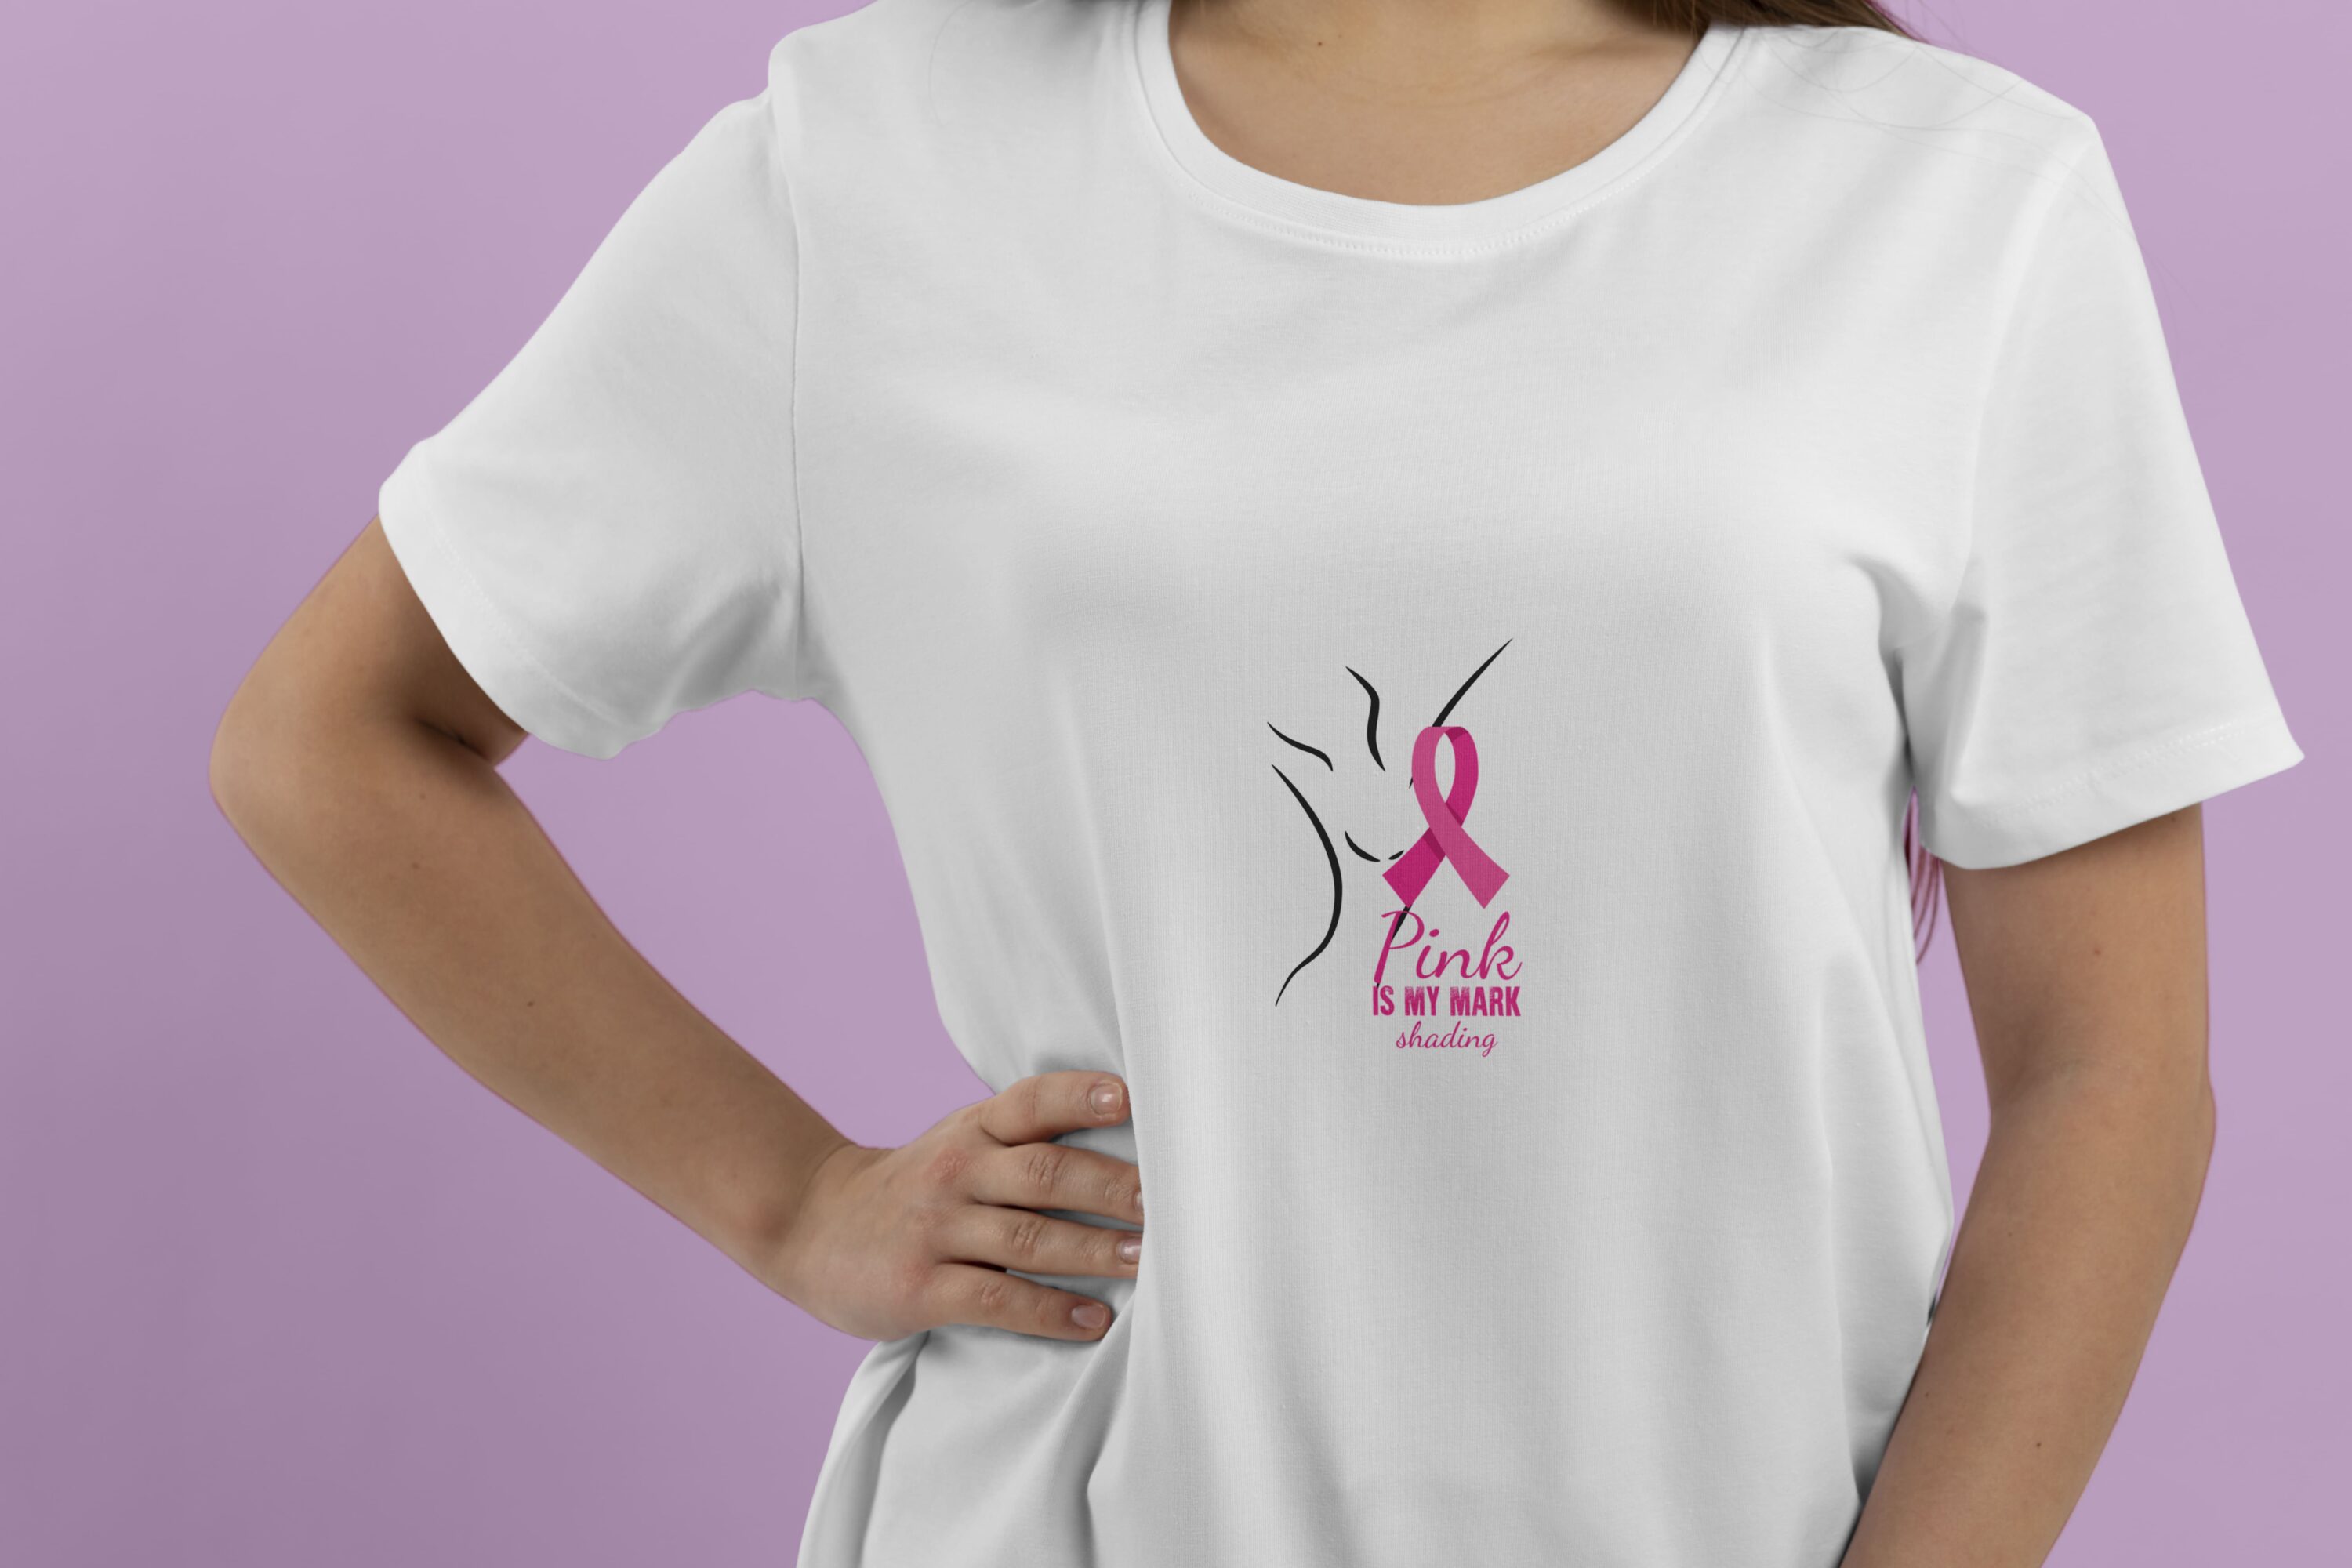 Delicate women body and breast cancer ribbon on the t-shirt.